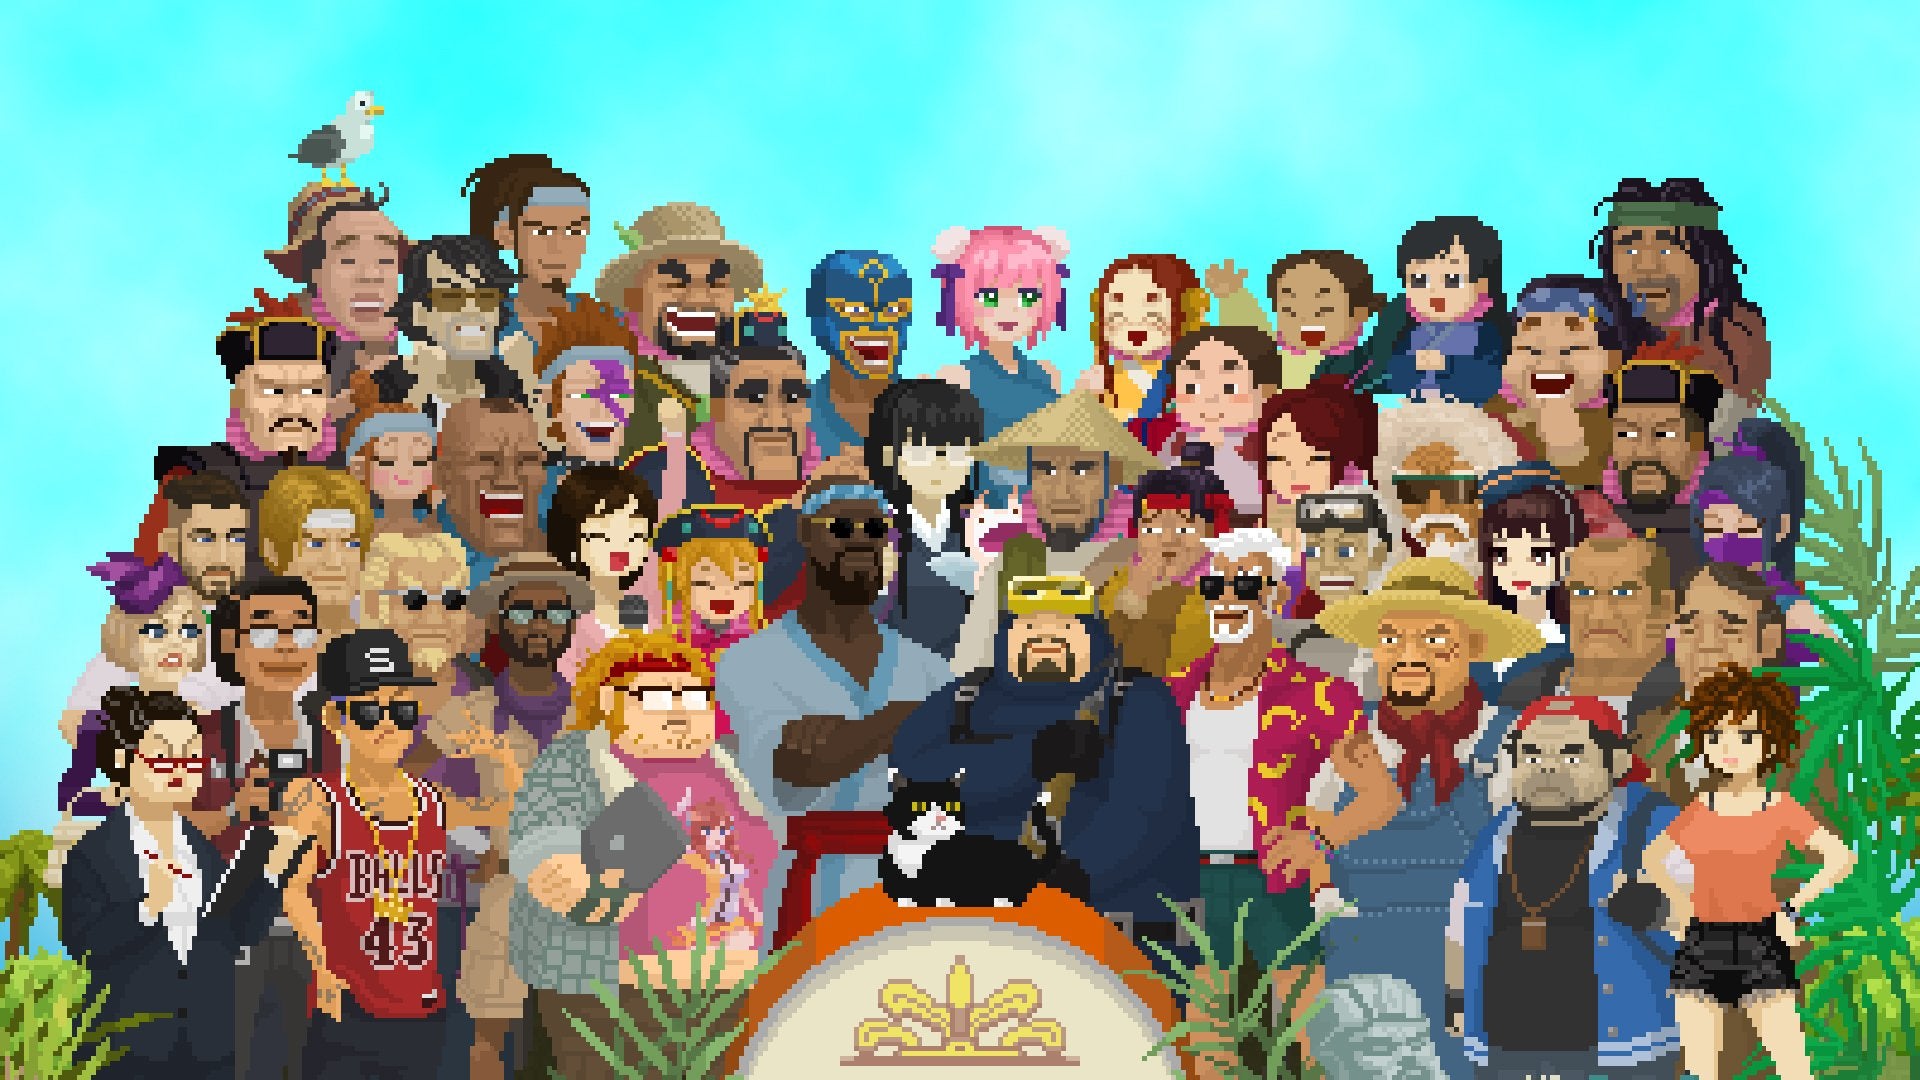 Dave and many other characters from Dave the Diver standing together.